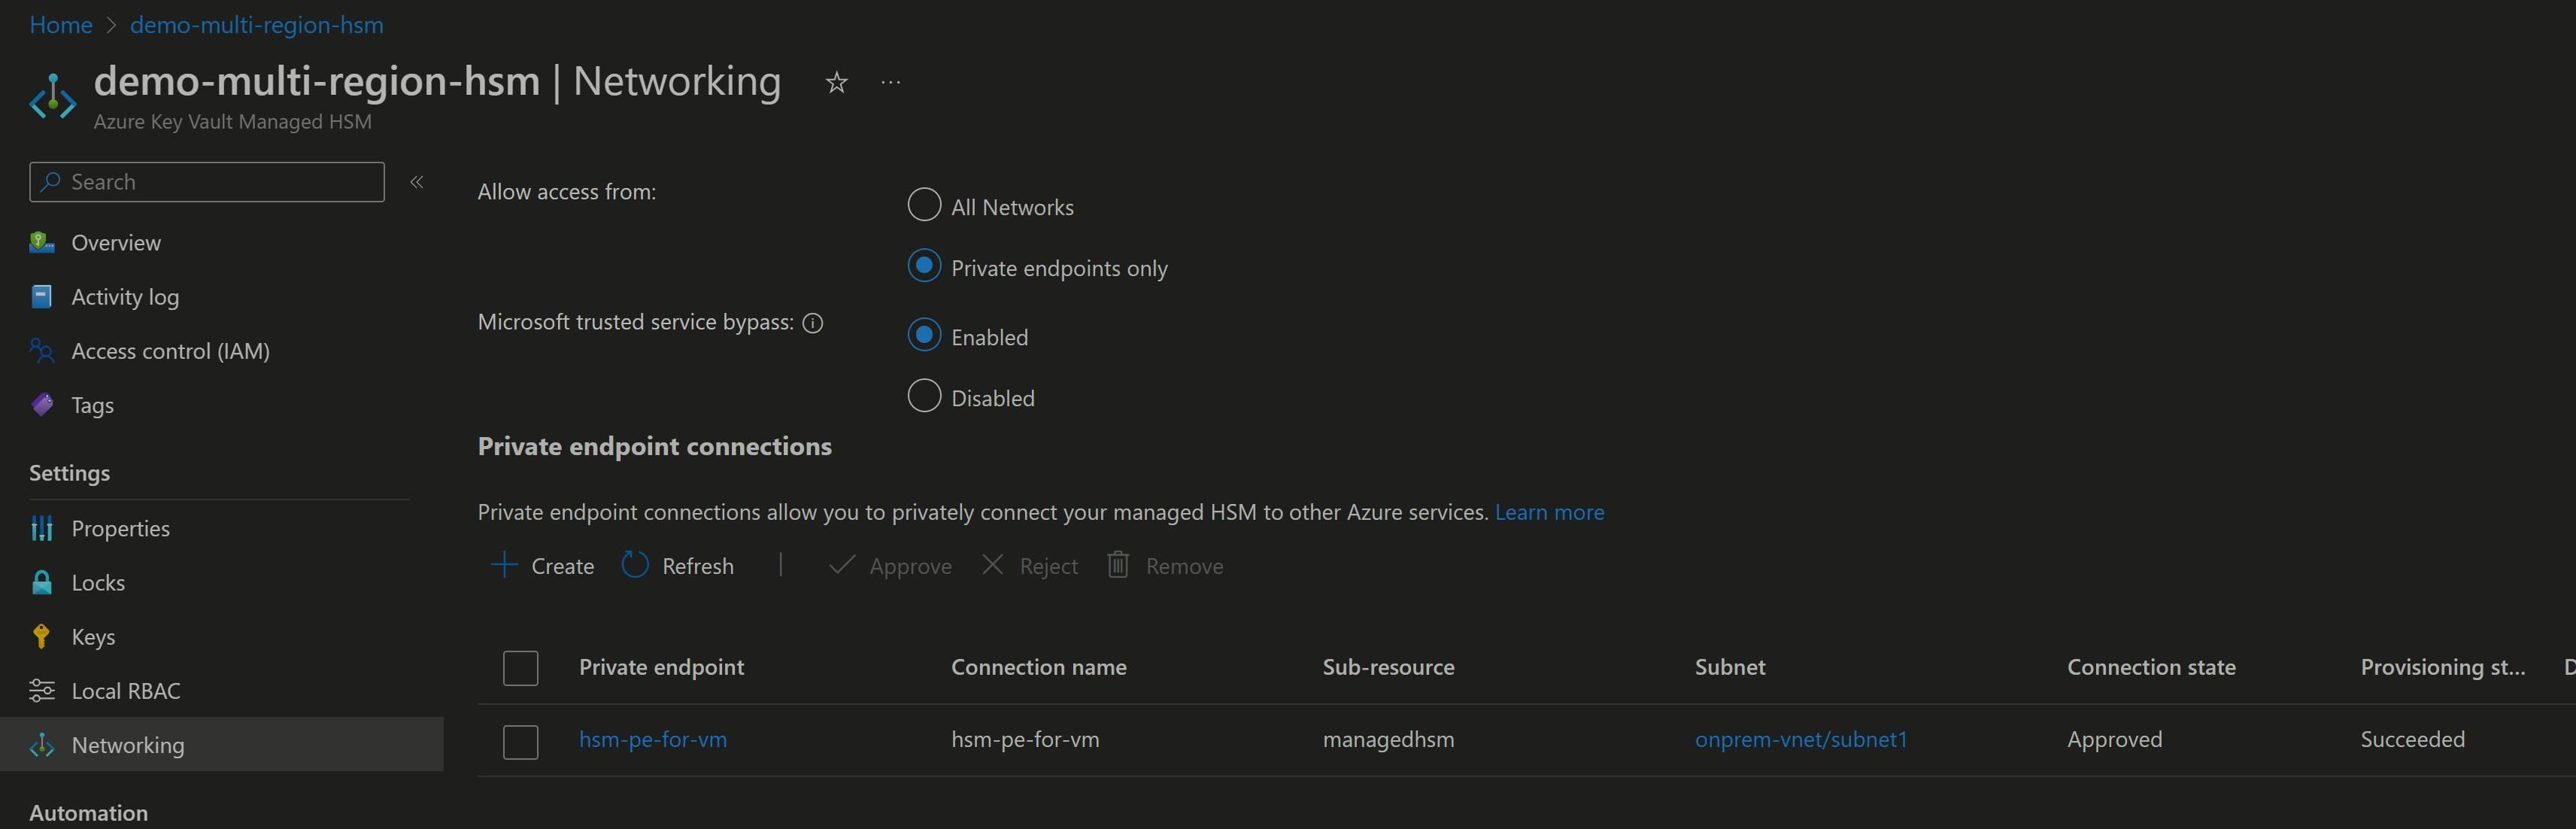 A Comprehensive Guide to Azure Managed HSM for Regulated Industries